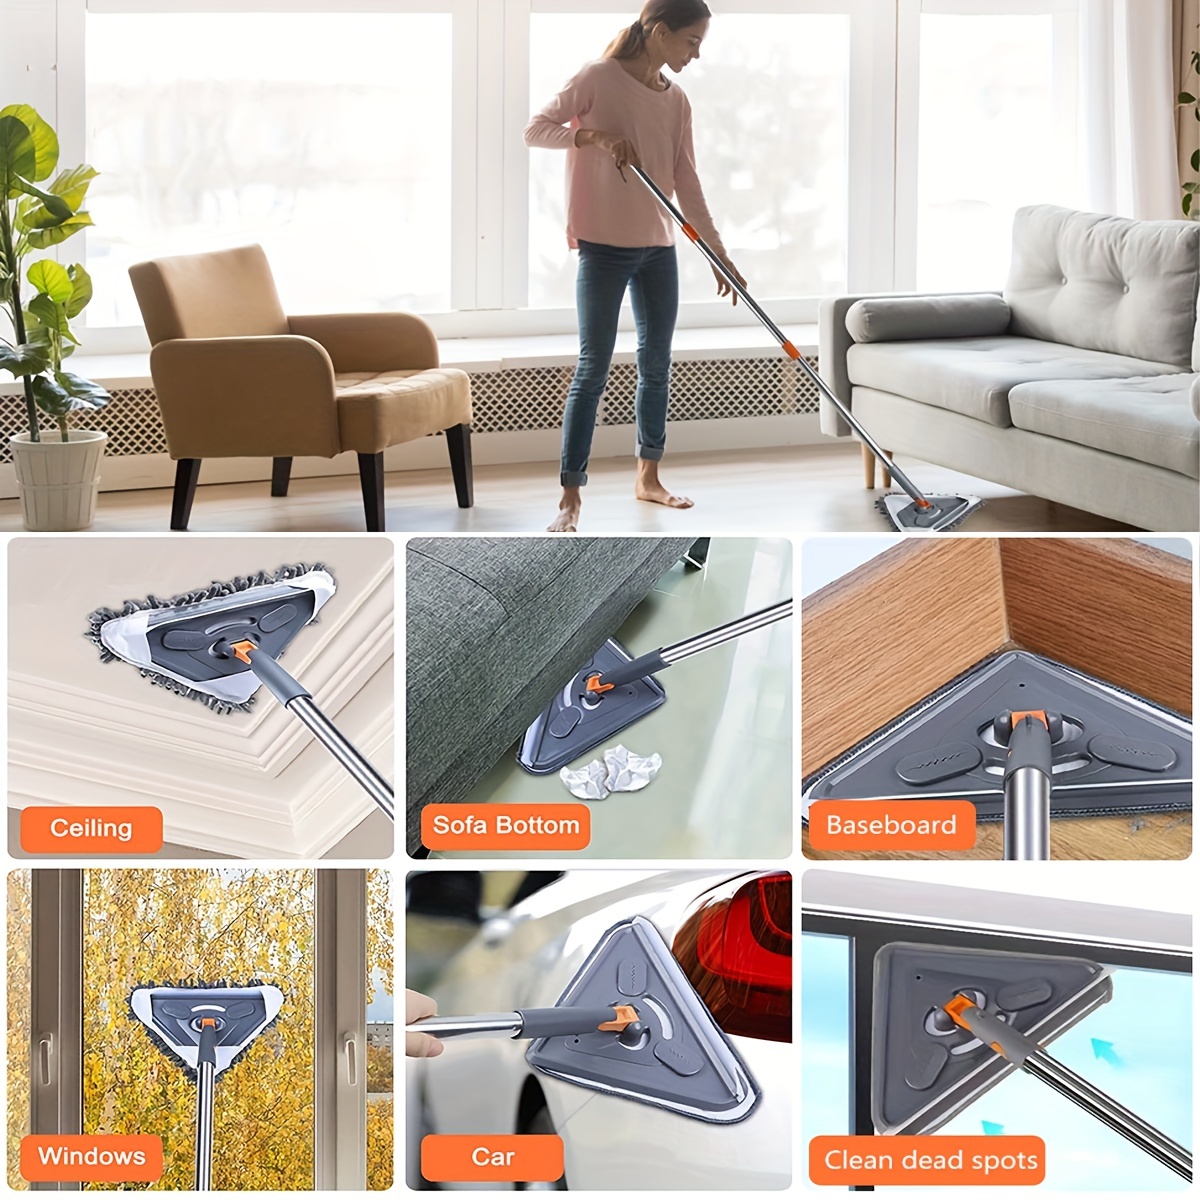 Baseboard Cleaner, 360° Rotatable Wall Mop, Wall & Baseboard Cleaner Tool  with Adjustable Long Handle, Cleaning Tool for Baseboards/Door